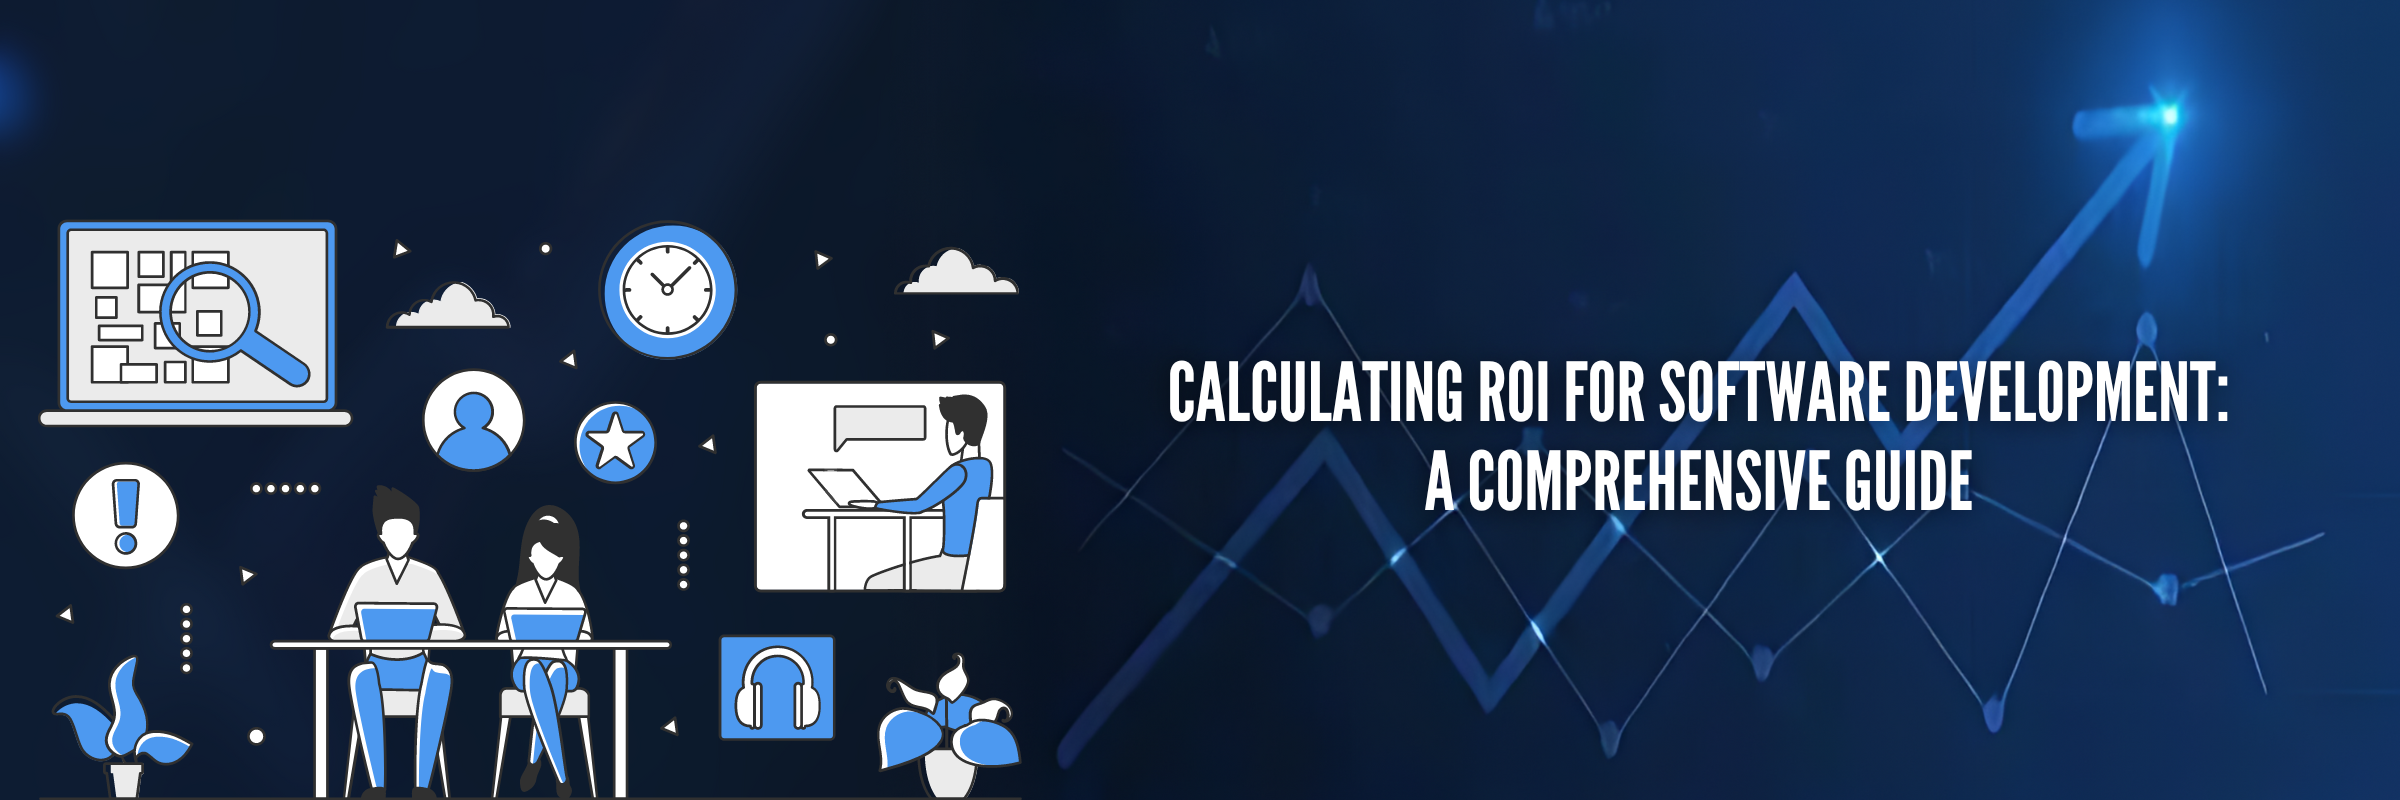 Calculating ROI for Software Development: A Comprehensive Guide